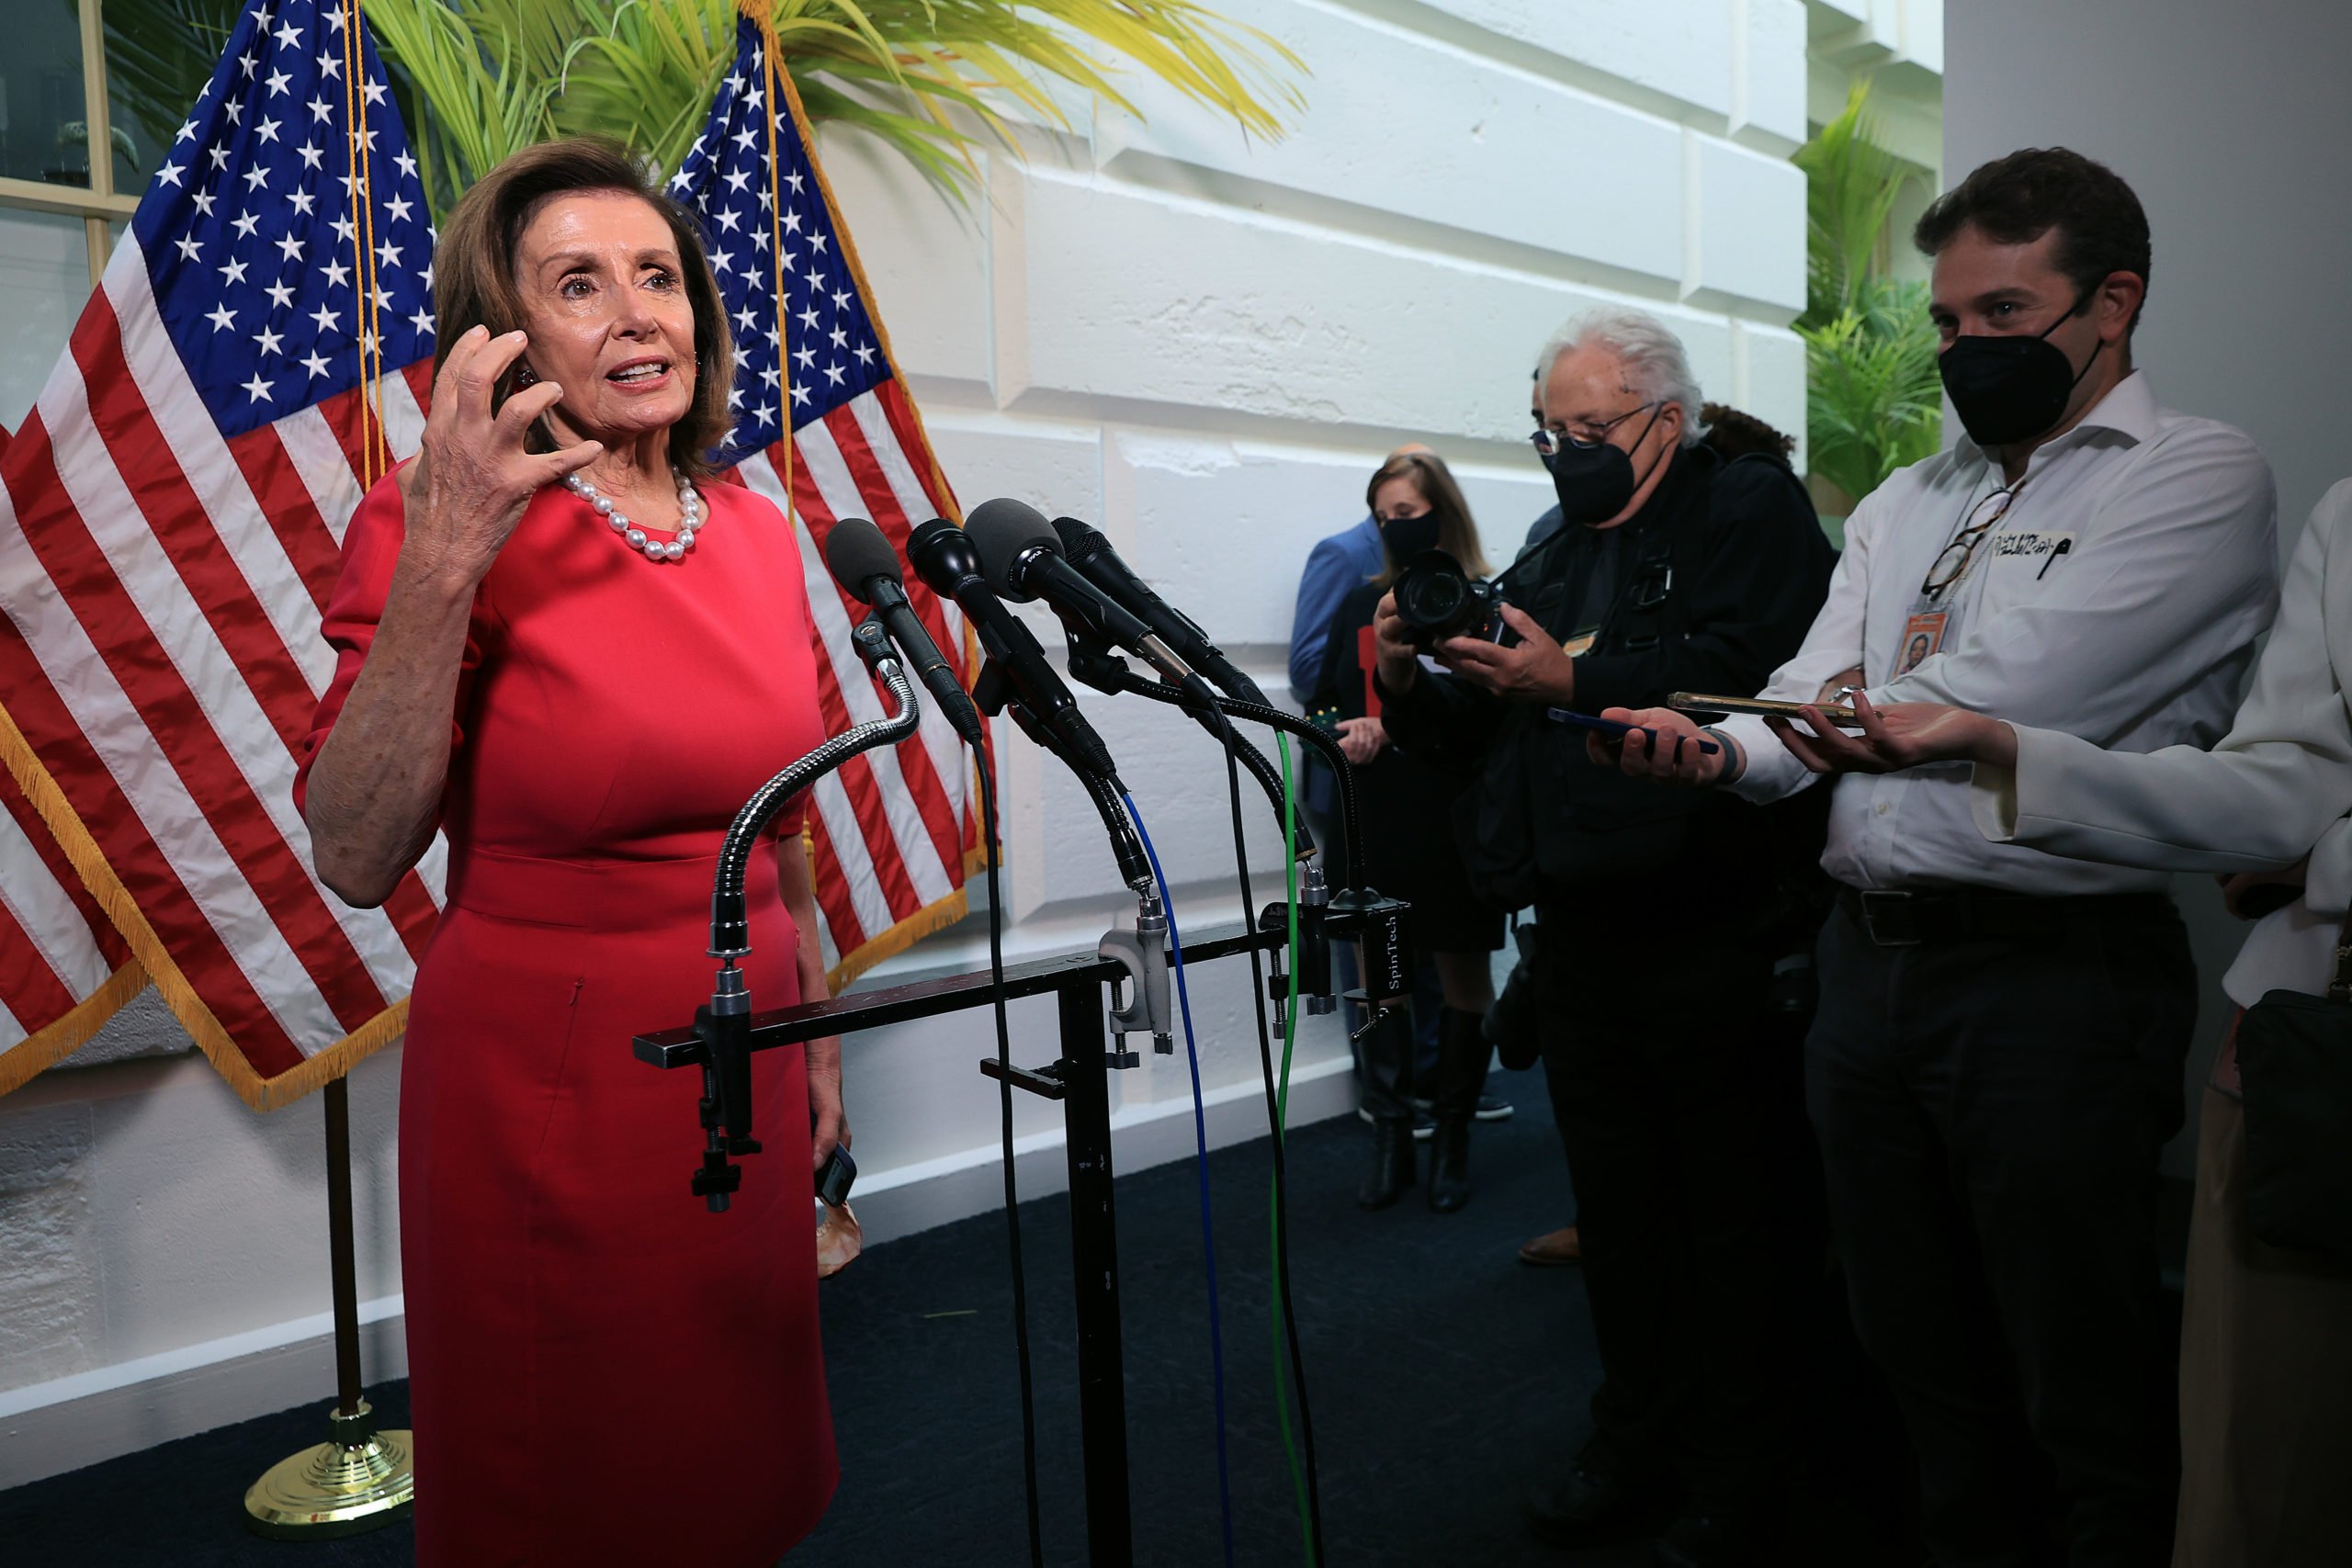 House Speaker Nancy Pelosi talks to reporters following a House Democratic caucus meeting Tuesday. (Chip Somodevilla/Getty Images)